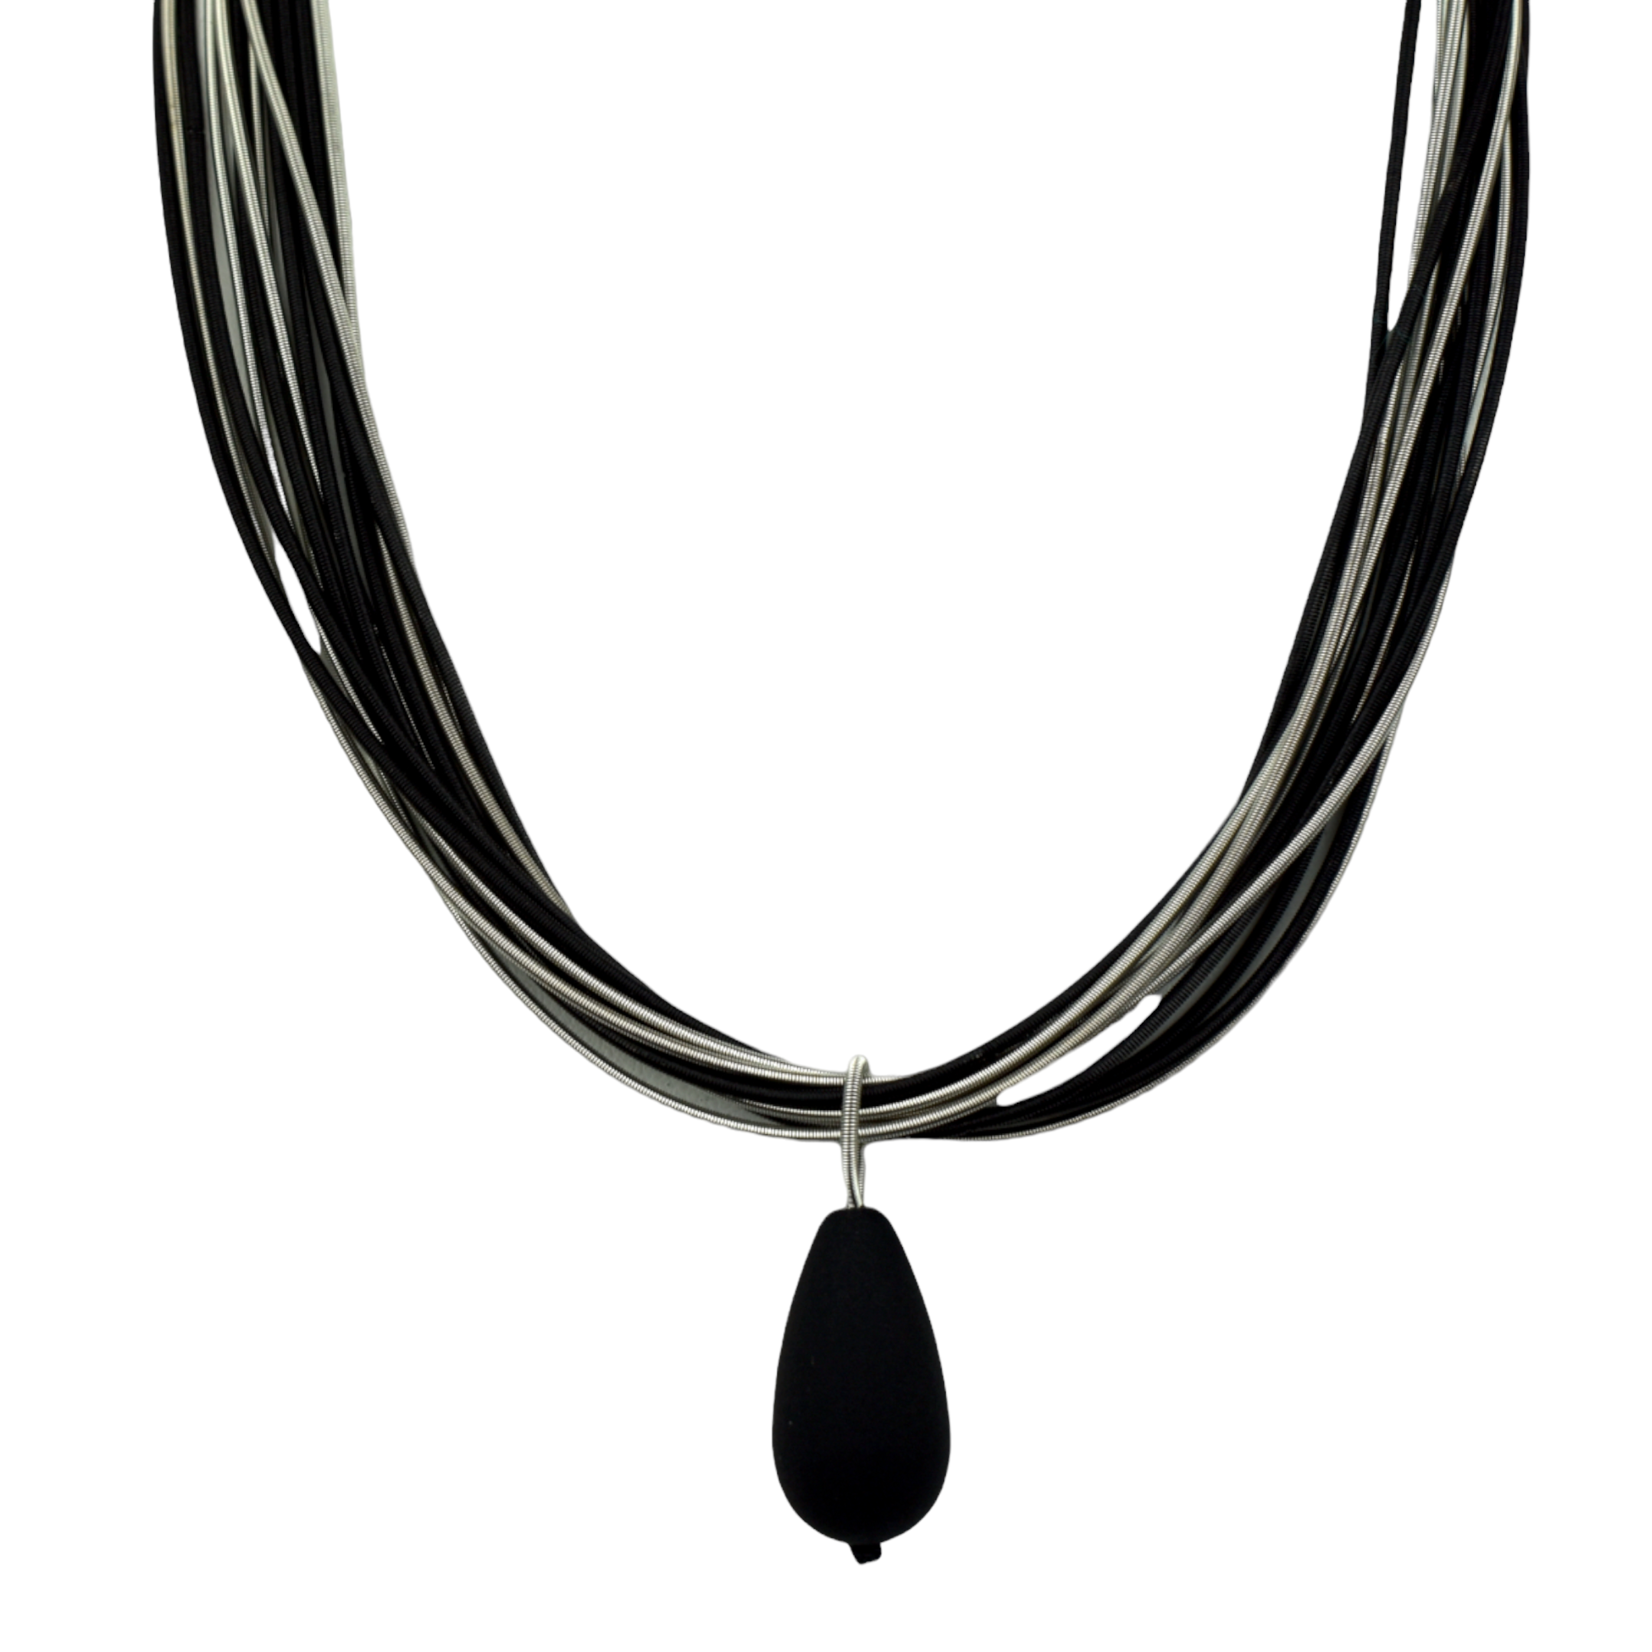 Piano Wire Black and Silver with Teardrop